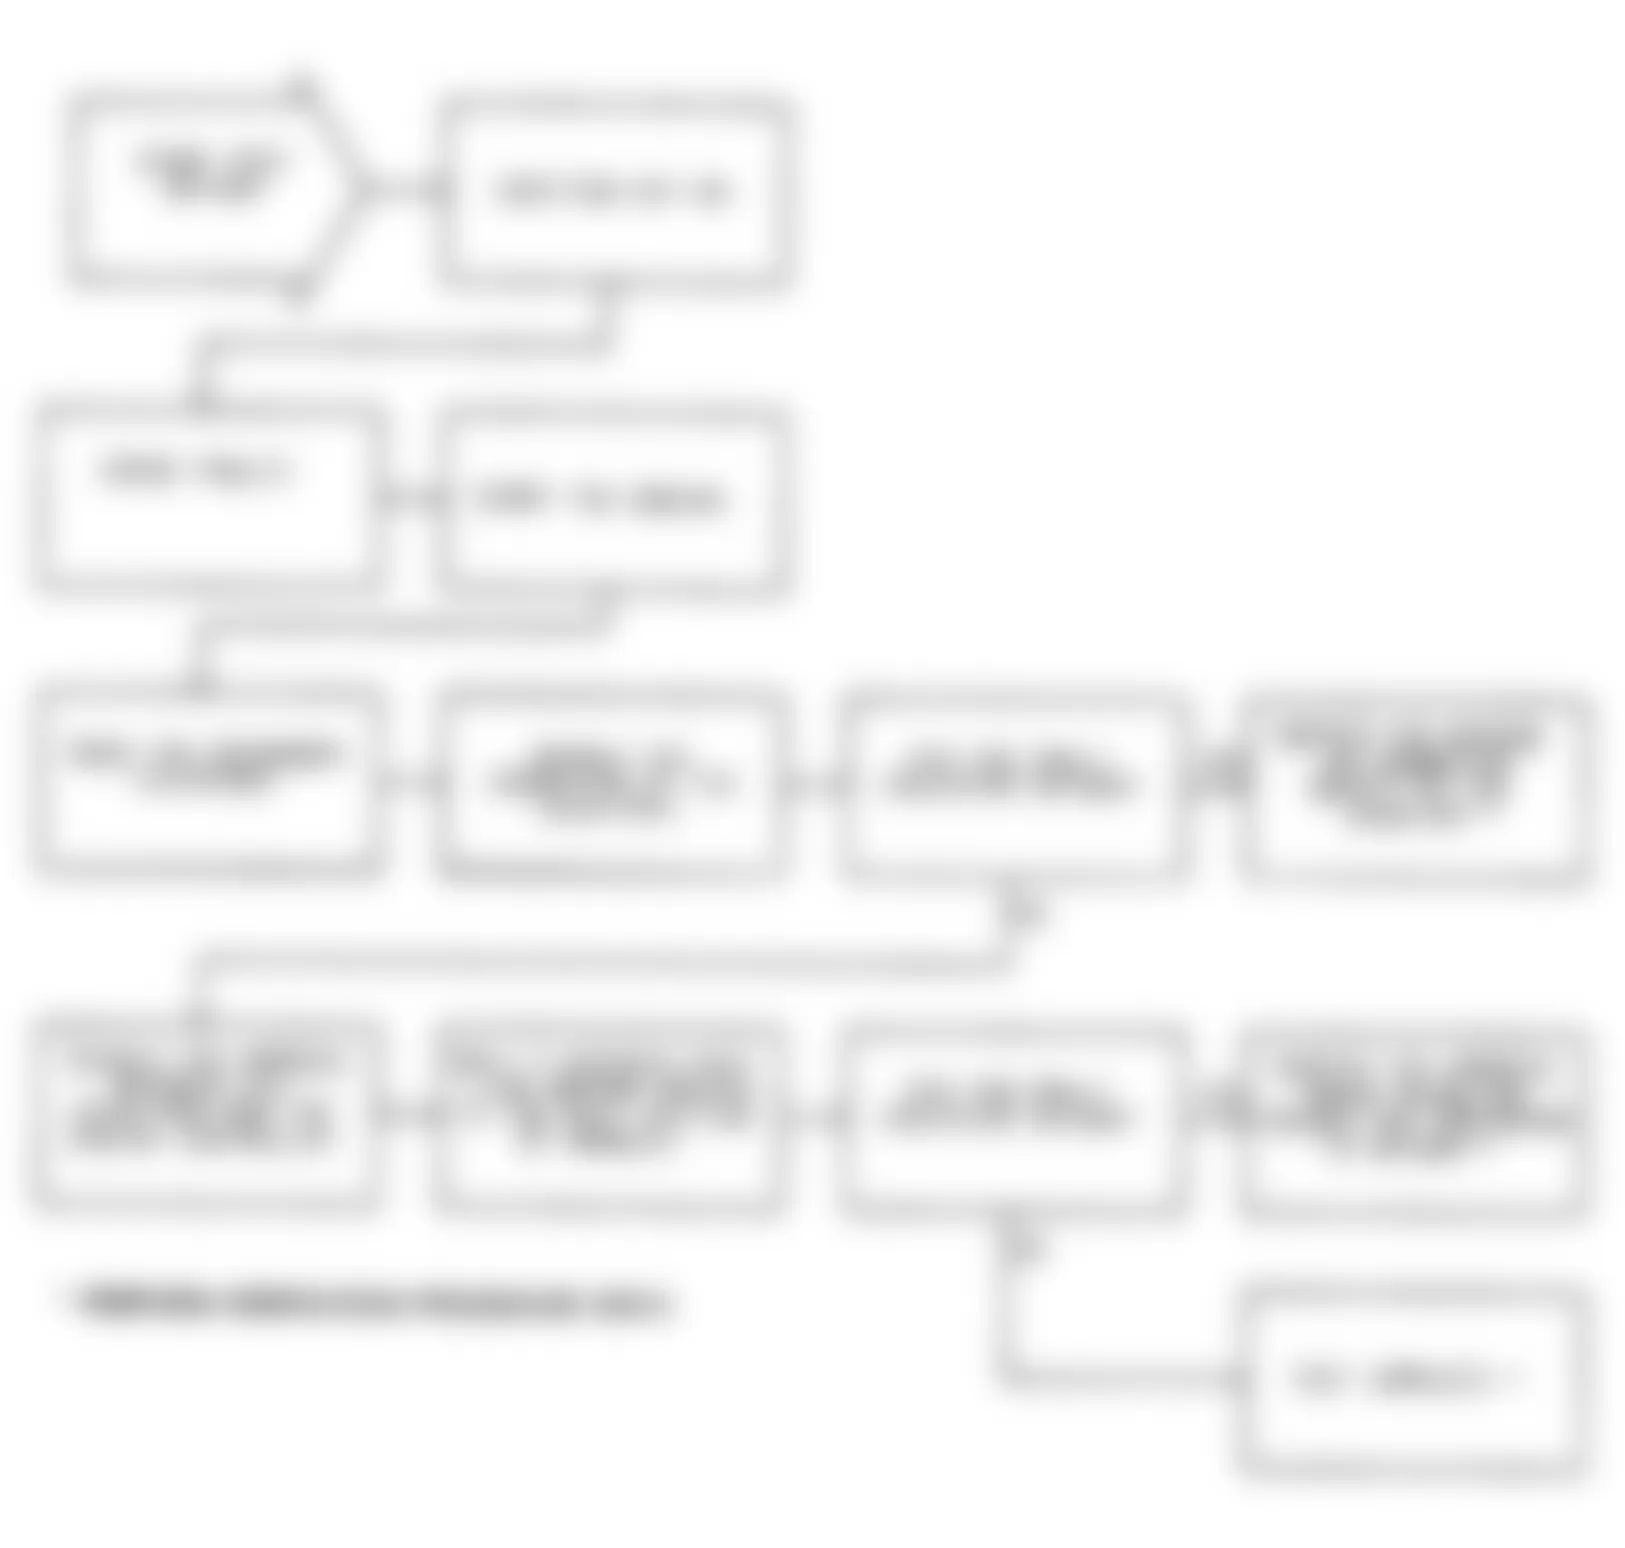 Chrysler Imperial 1991 - Component Locations -  Test DR-49A: Flowchart